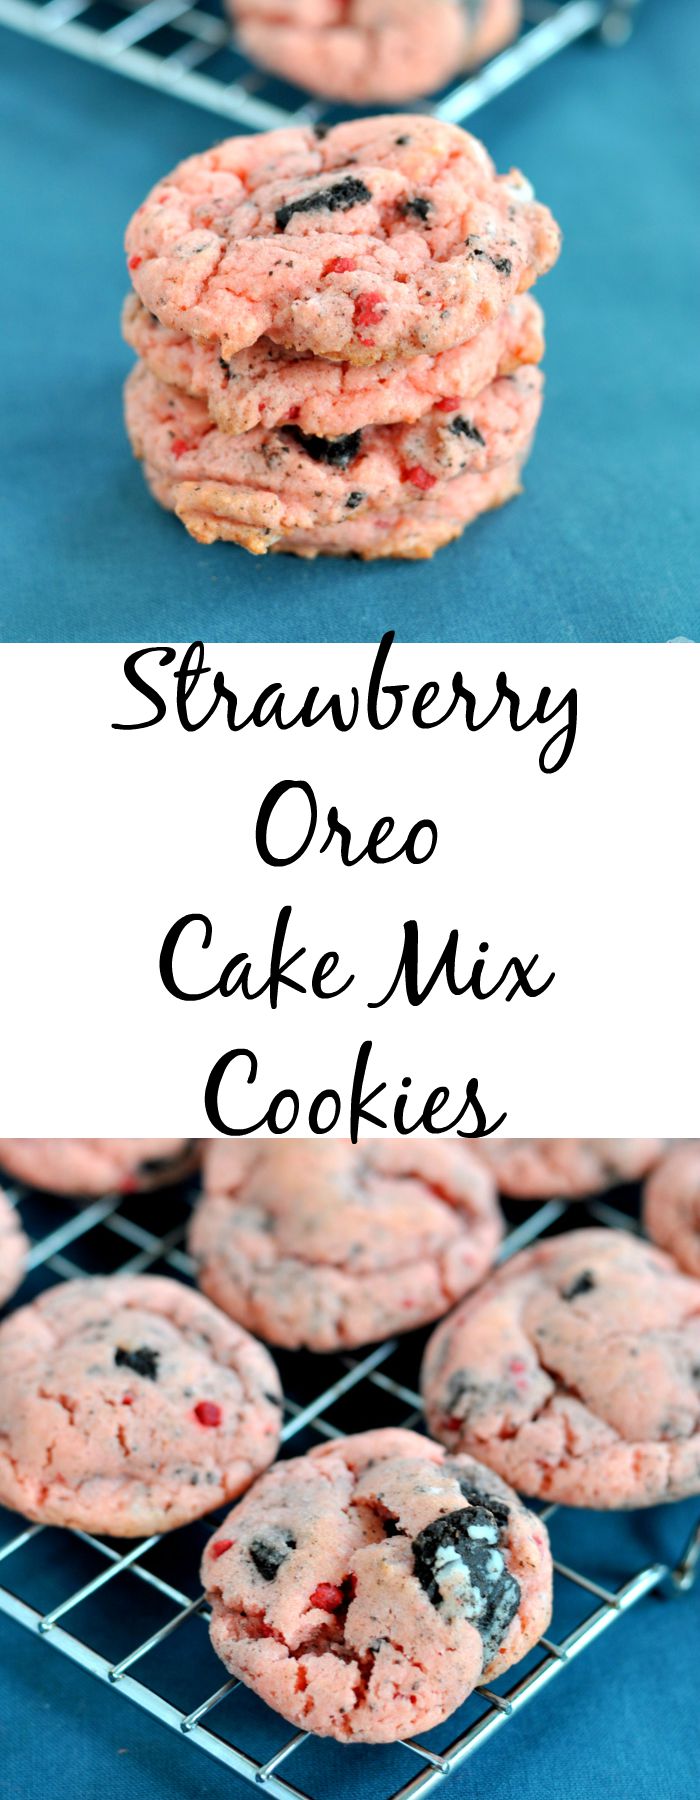 4 ingredients and 15 minutes is all you need to make strawberry Oreo cake mix cookies!